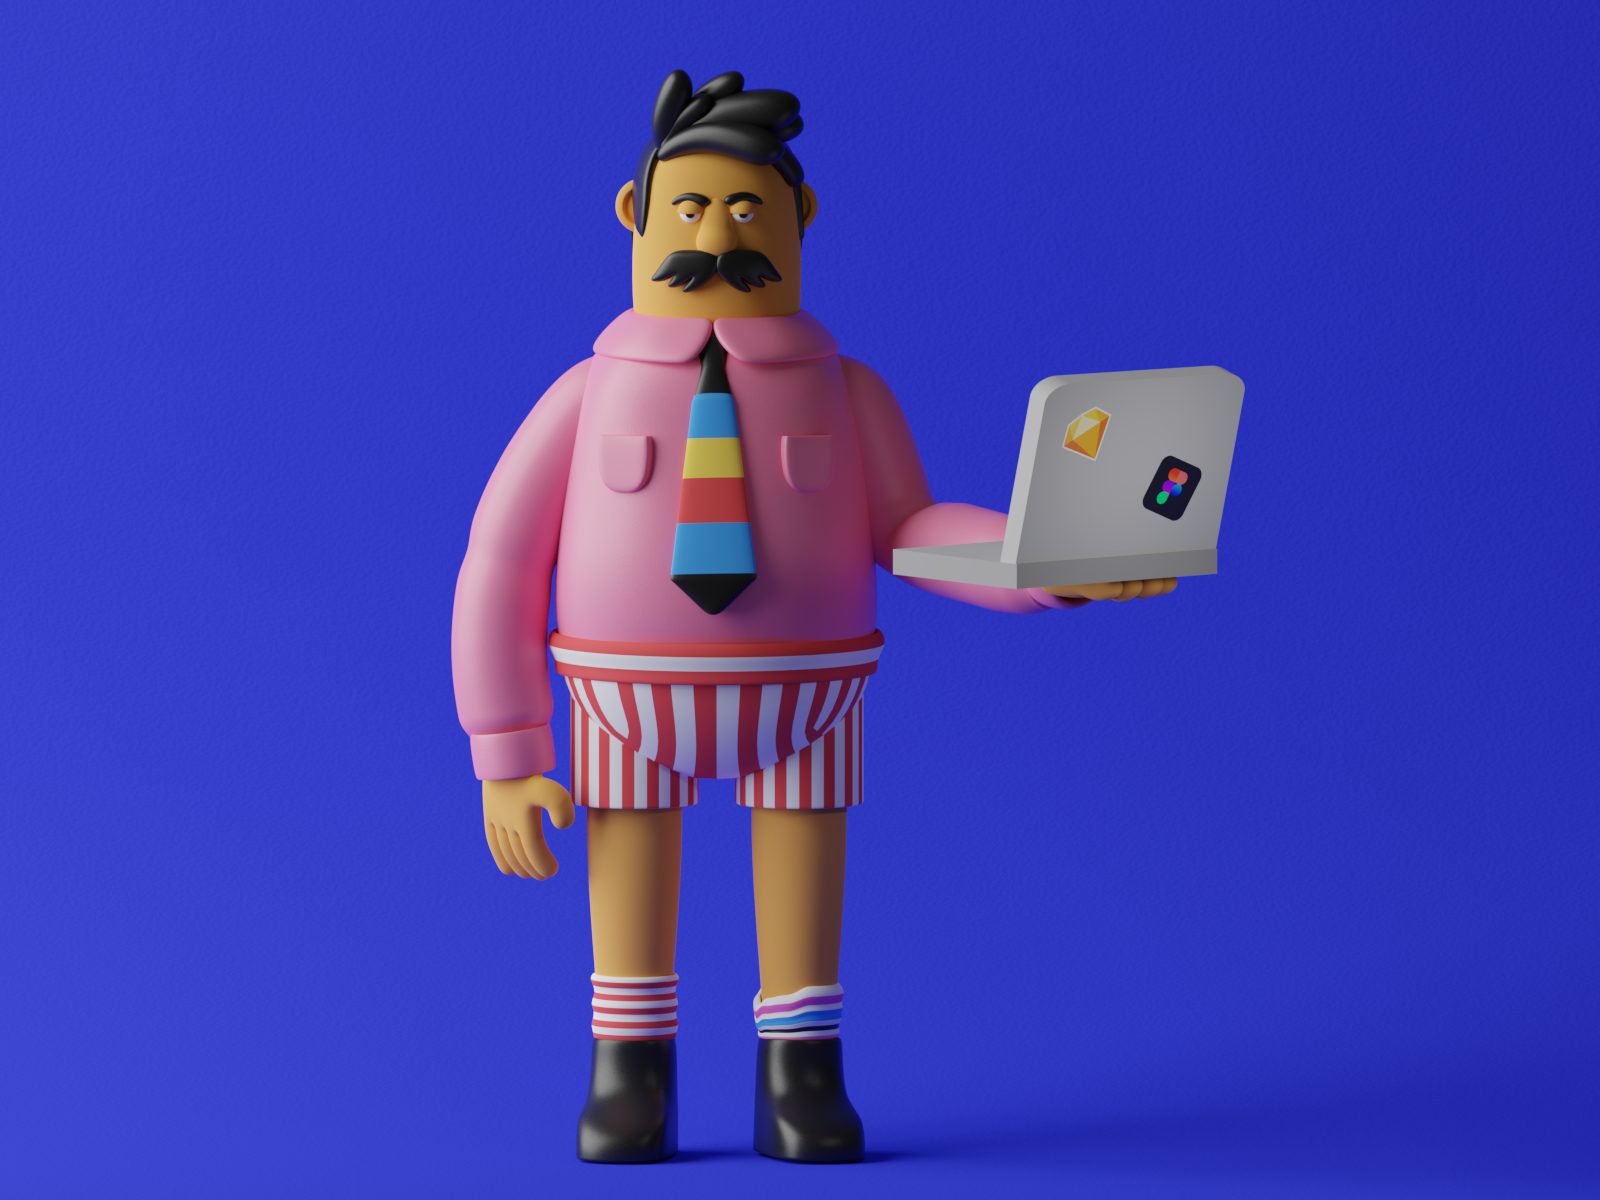 WFH Days 153 - 3D Illustration by Alzea Arafat on Dribbble